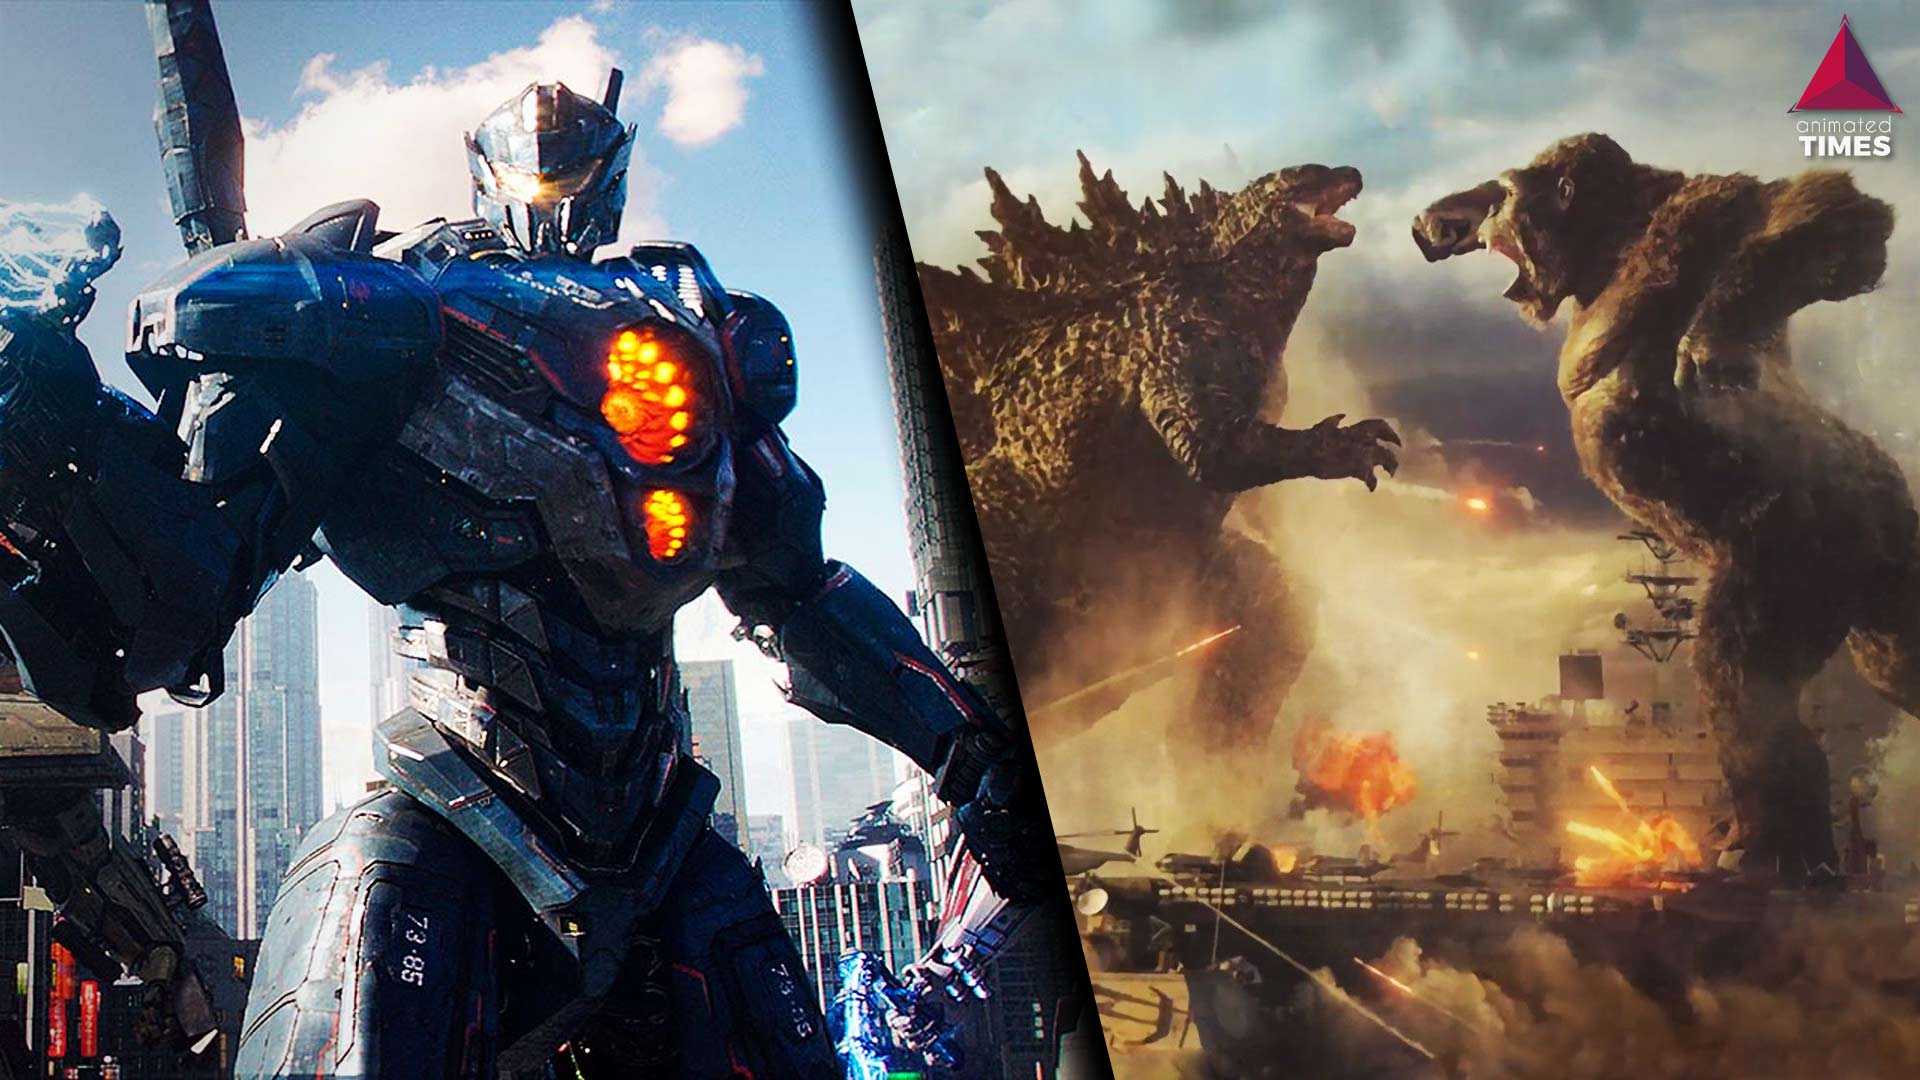 Pacific Rim 3 Was Supposed to Connect With Godzilla vs. Kong's MonsterVerse